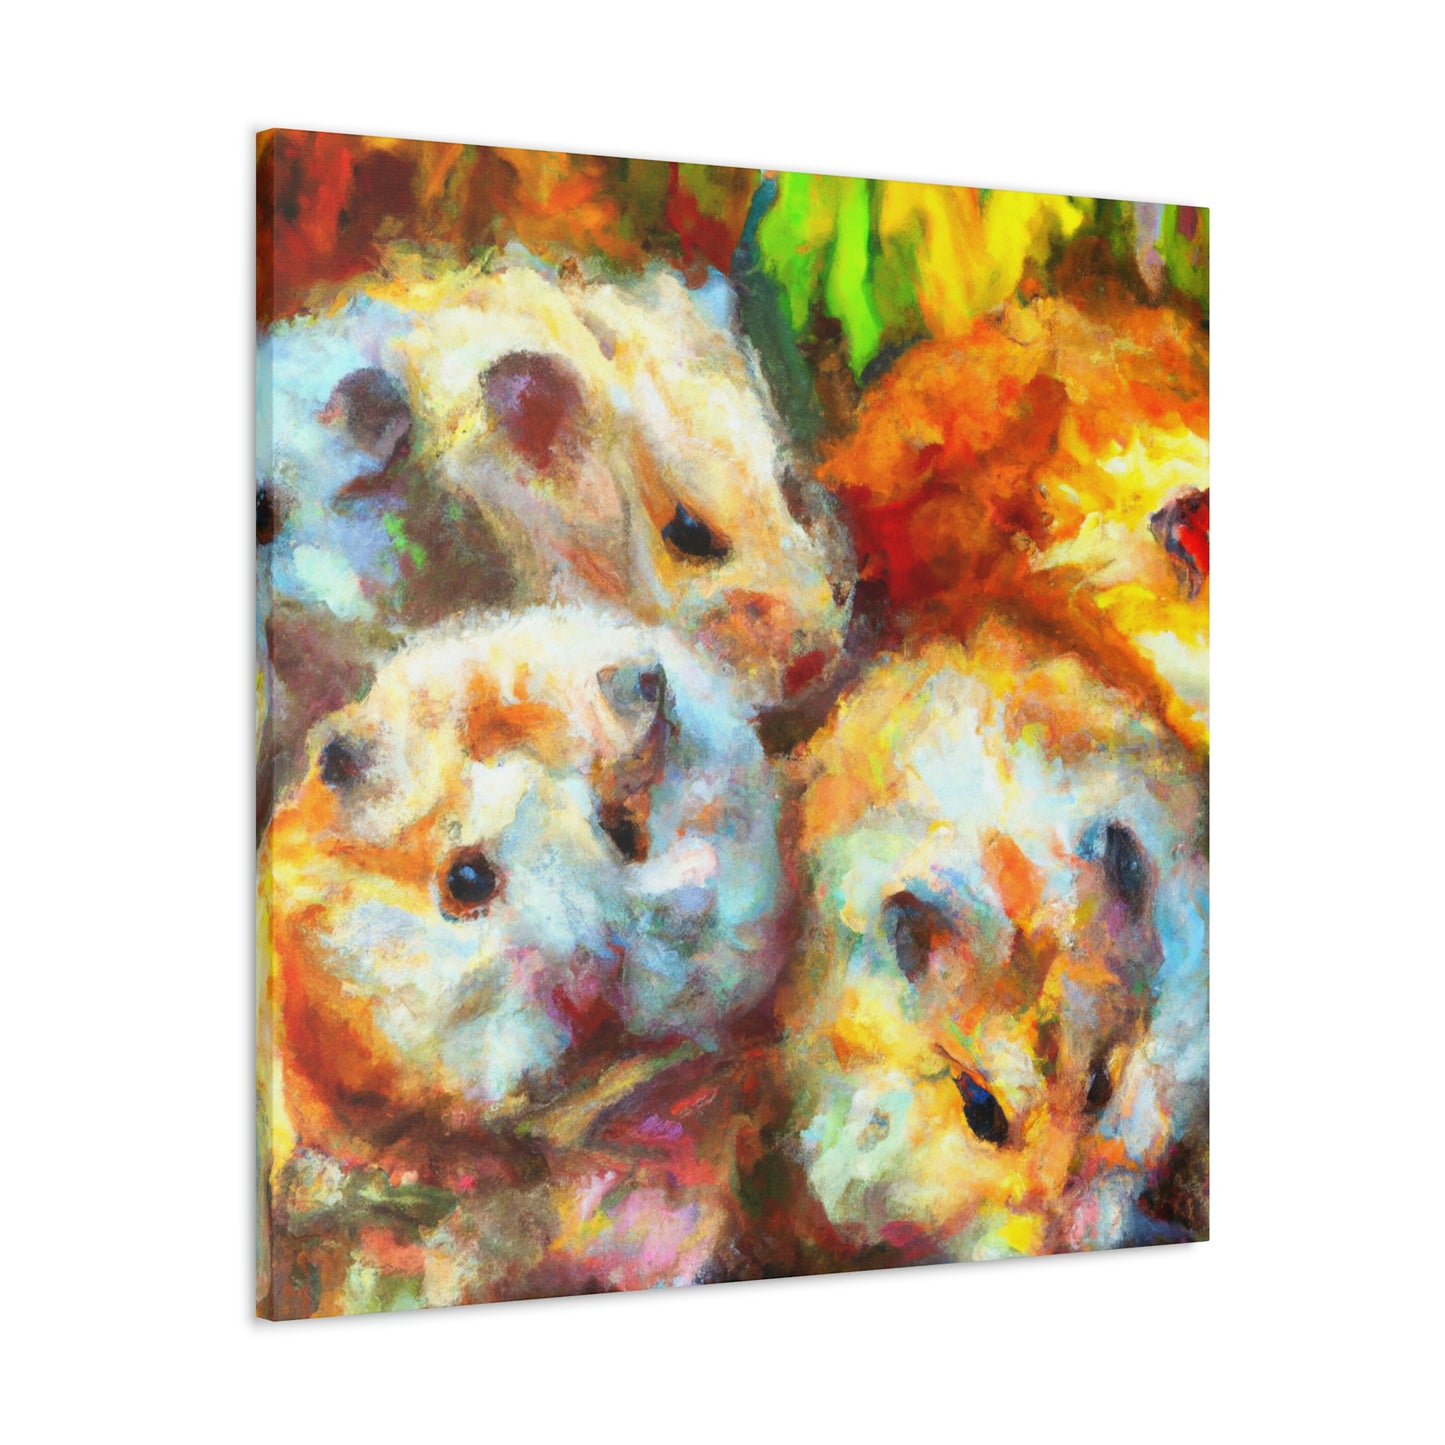 Hamsters In Impressionism - Canvas